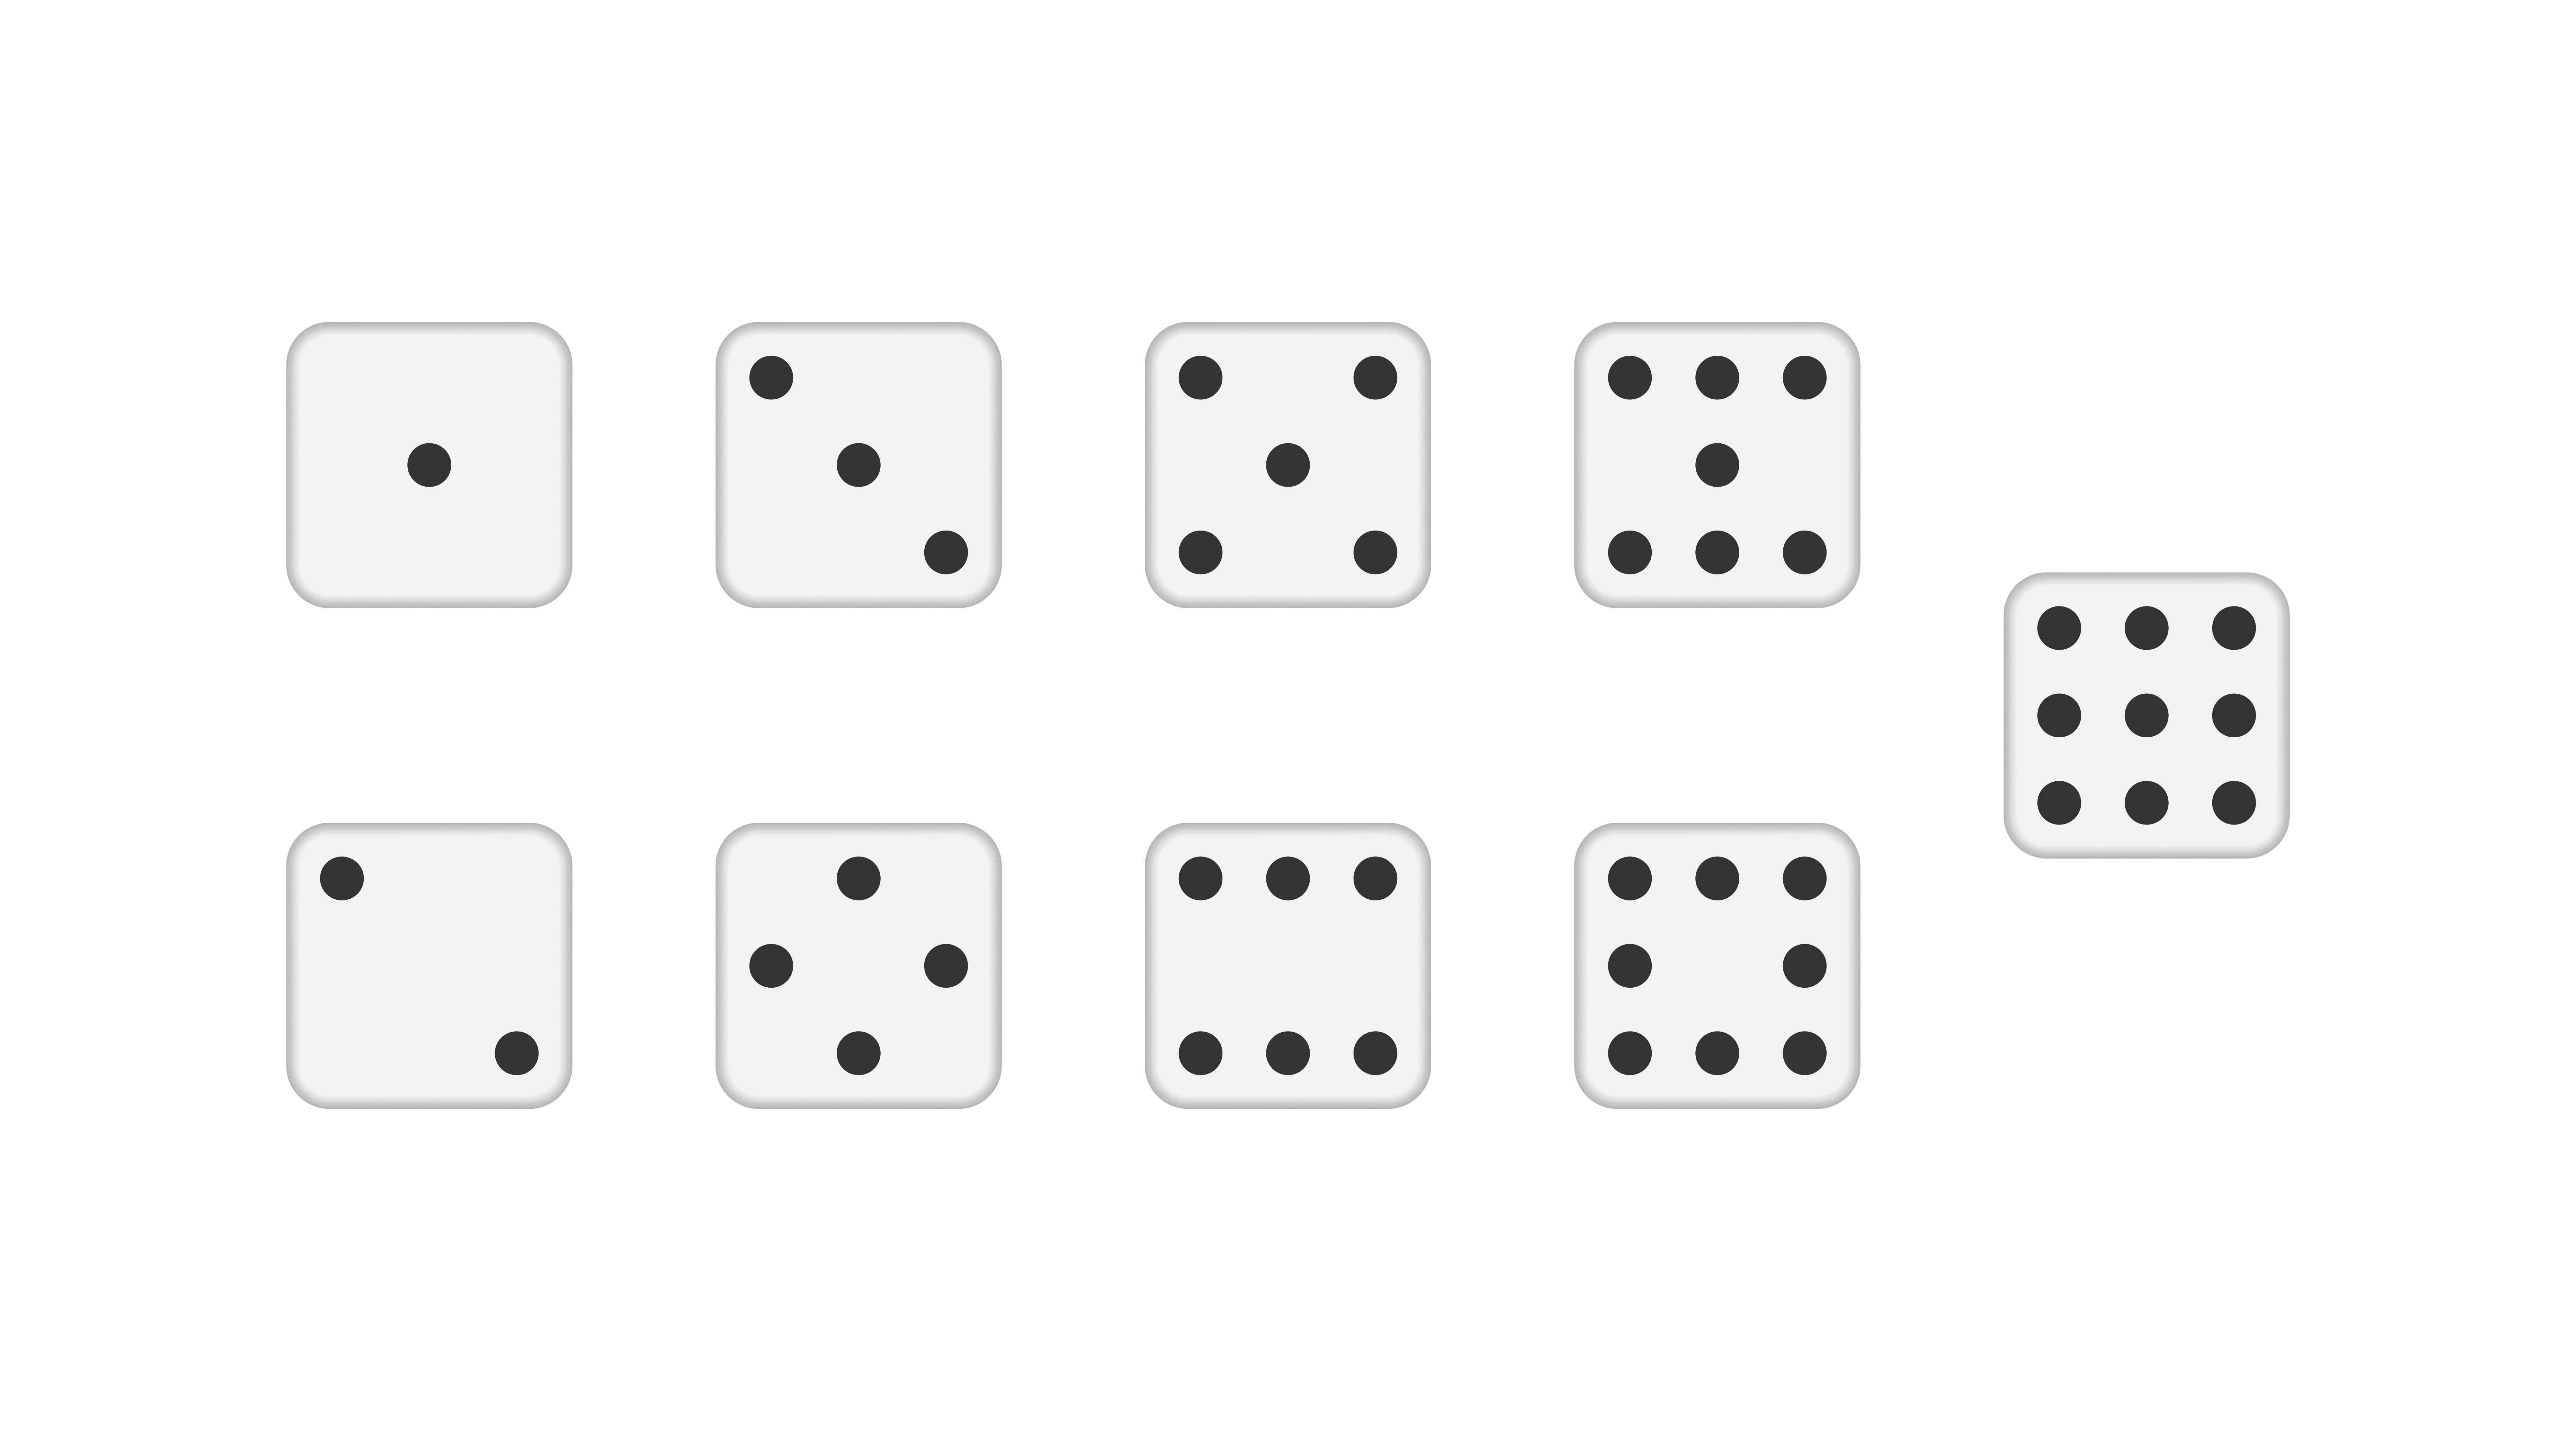 Vector Dice. White cubes icons with black circles. Six and nine dice. One two three four five dots. Devils bones poker game